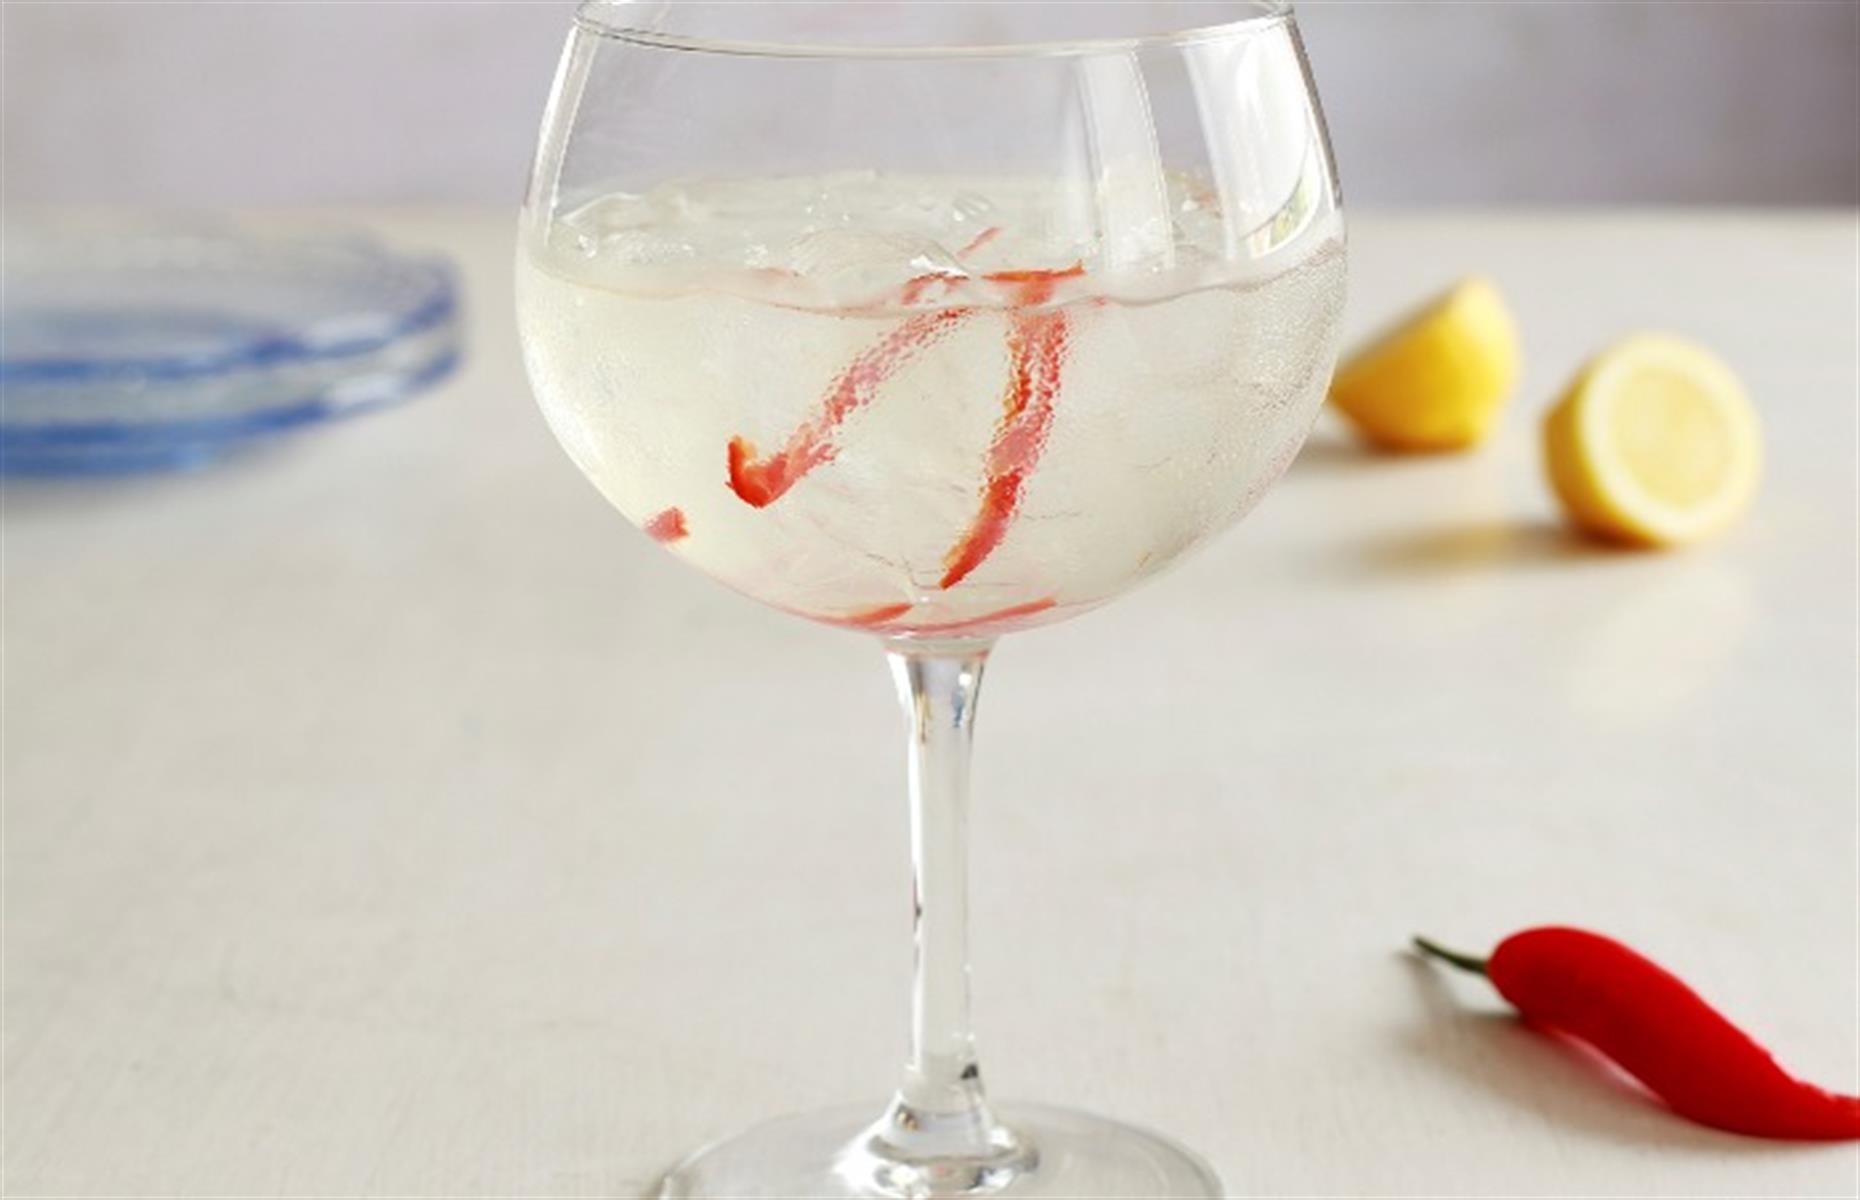 <p>Why not use chilies in cocktails? Infuse a sugar syrup with a few slivers of fresh chili or add a pinch of smoked chili powder to salt when edging your glass for a margarita. Try our gin cocktail recipe with homemade lemonade and chili, which is fresh and tangy with a hint of heat.</p>  <p><a href="https://www.lovefood.com/recipes/76951/the-fiery-starter-gin-cocktail-recipe"><strong>Get the recipe for gin cocktail with chili here</strong></a></p>